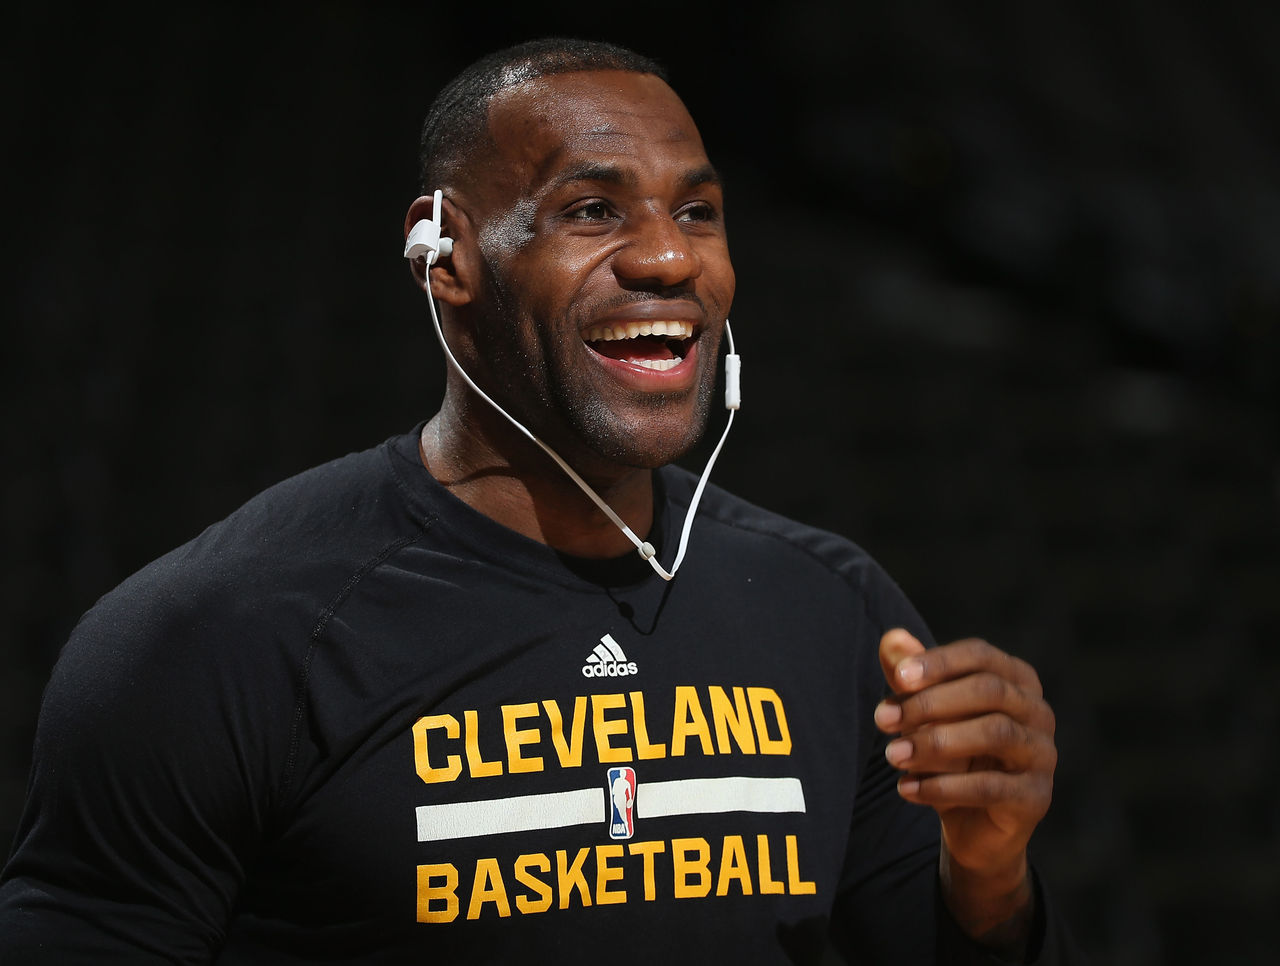 LeBron James Responses to Kanye West Nike Diss Track Facts